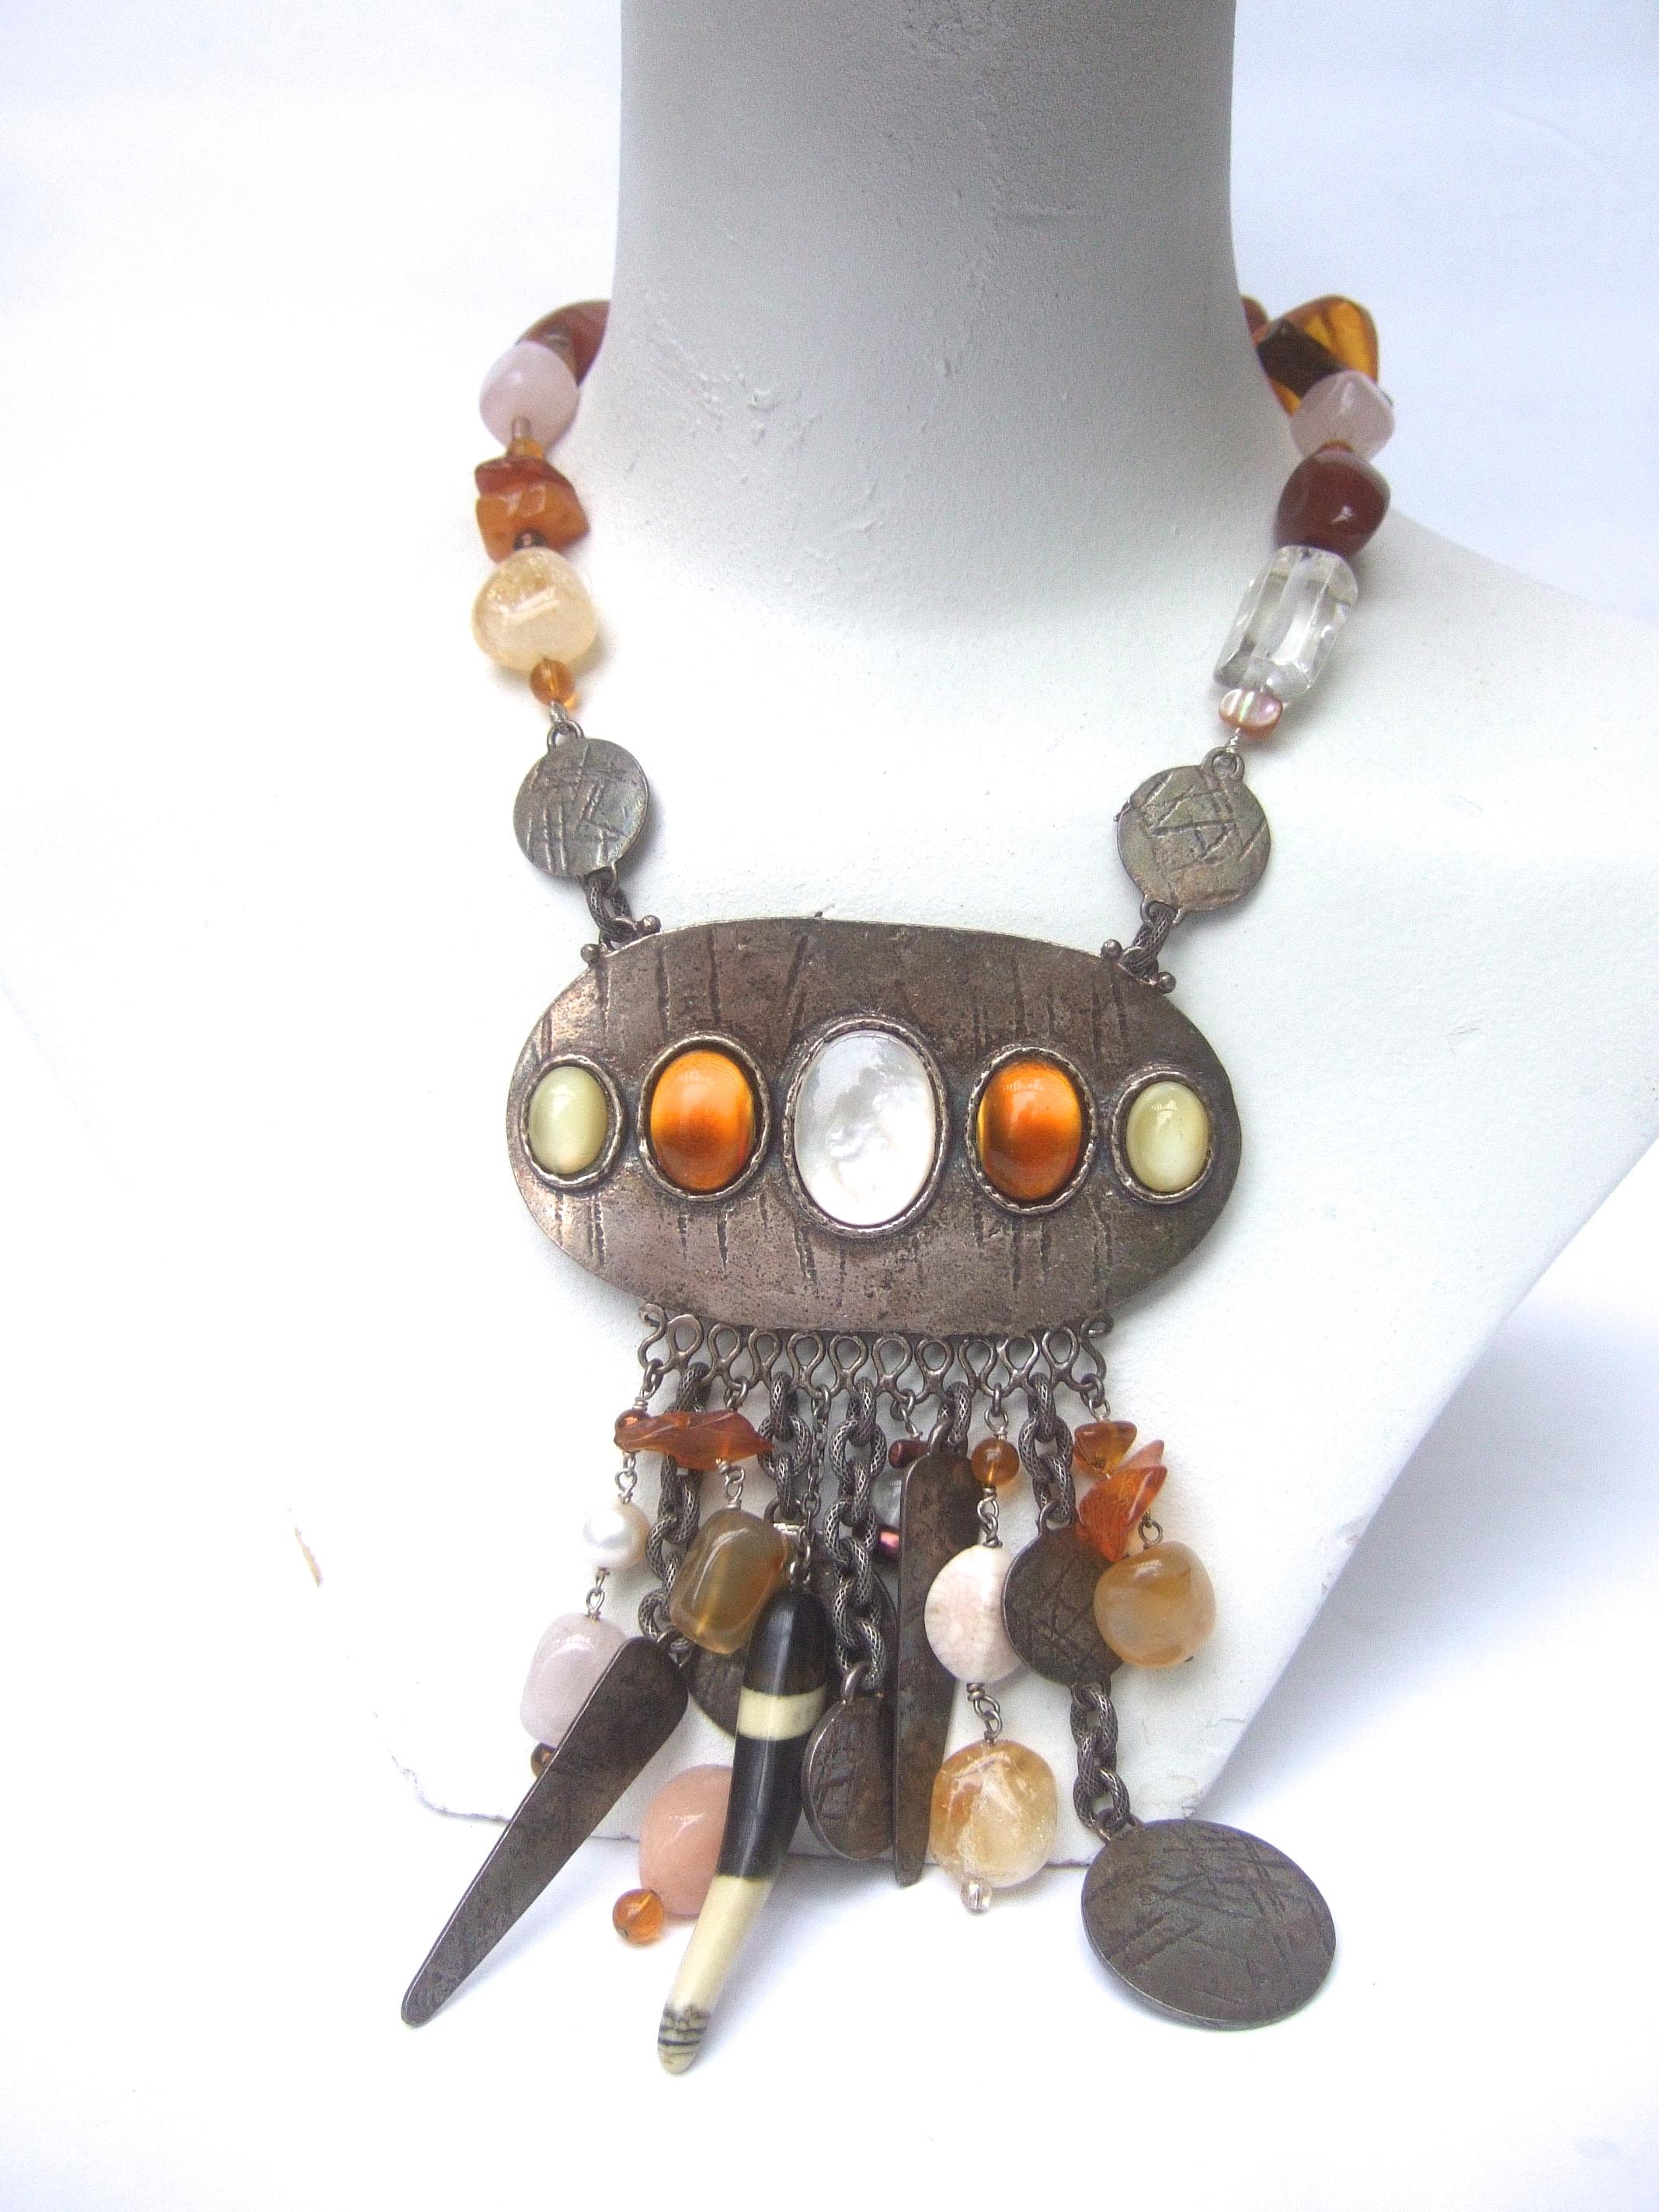 Phillipe Ferrandis Paris Glass Stone Dangling Charm Necklace c 1980s In Good Condition For Sale In University City, MO